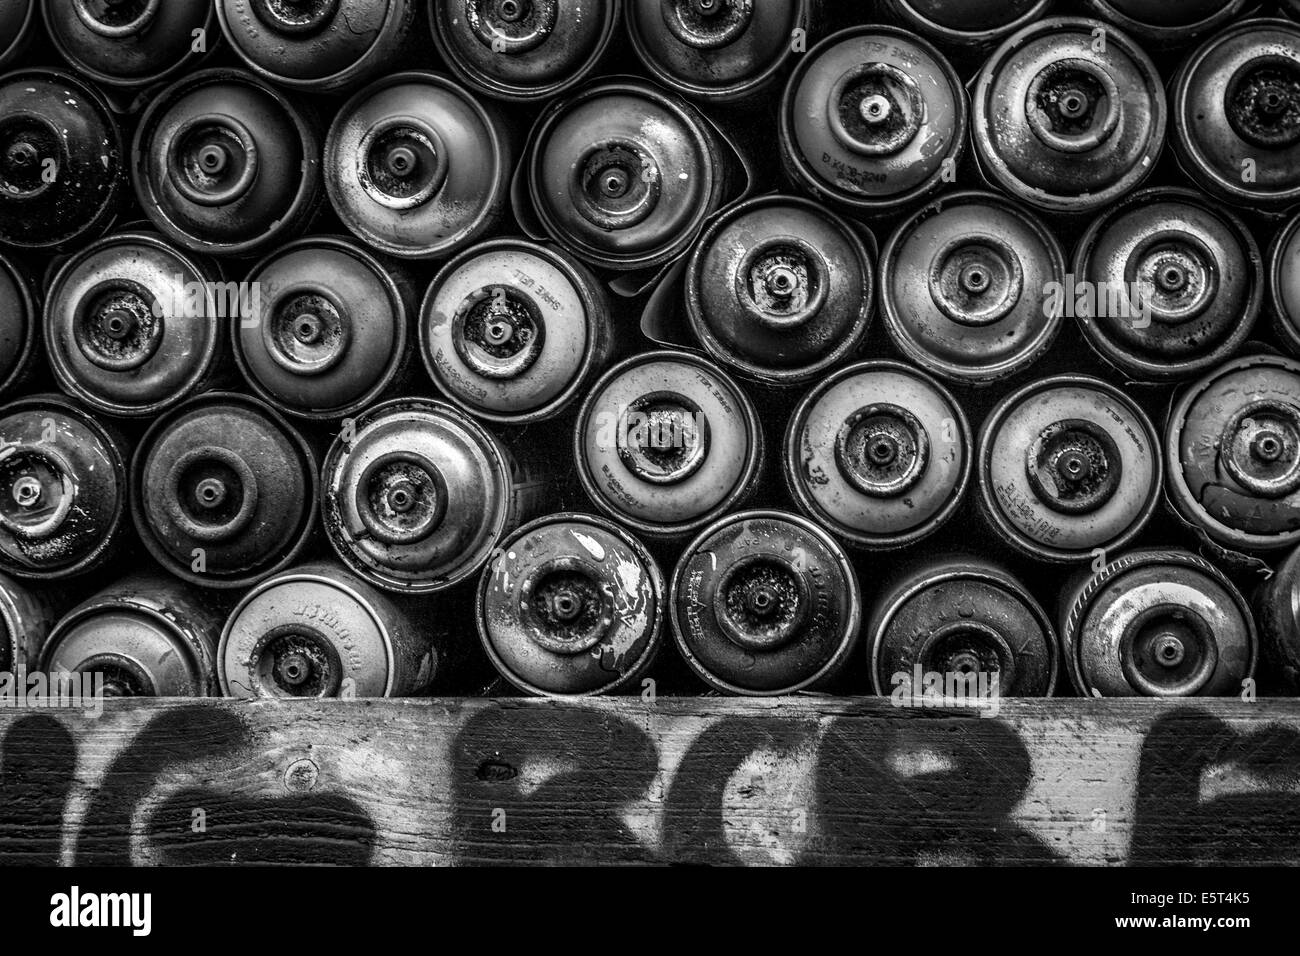 Black spray paint metal cans isolated on white Stock Photo by